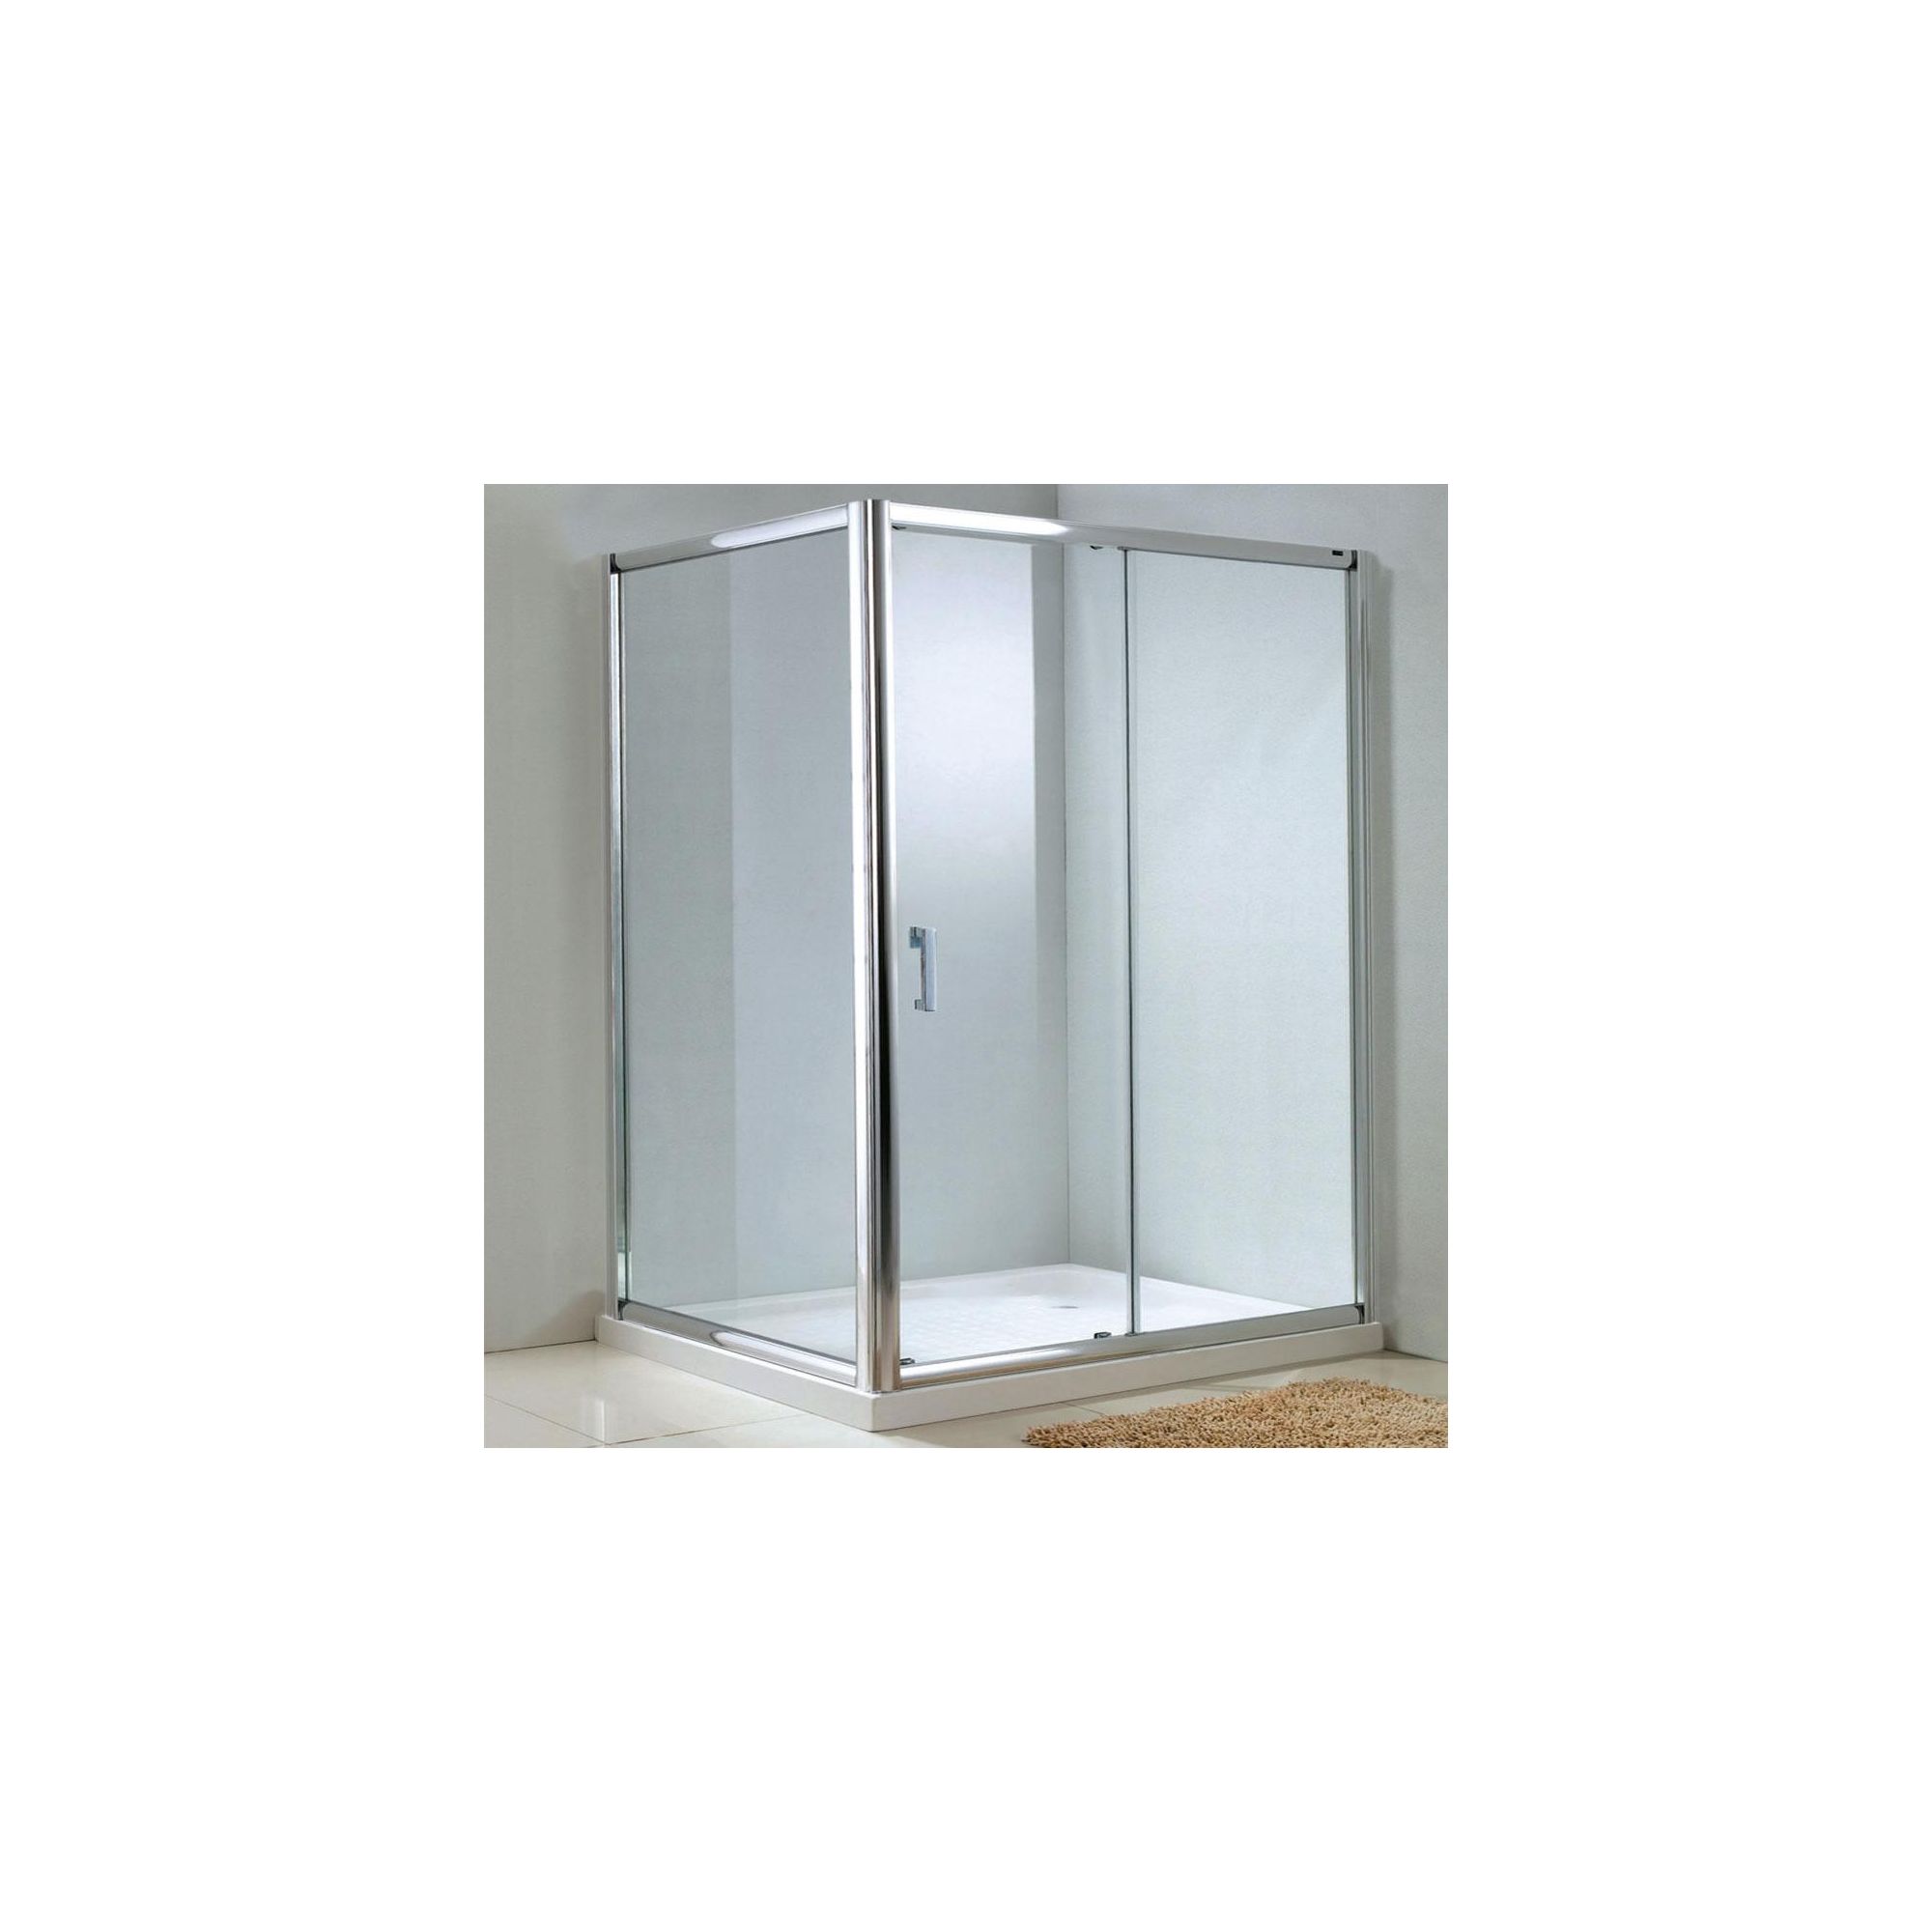 Duchy Style Single Sliding Door Shower Enclosure, 1000mm x 900mm, 6mm Glass, Low Profile Tray at Tesco Direct